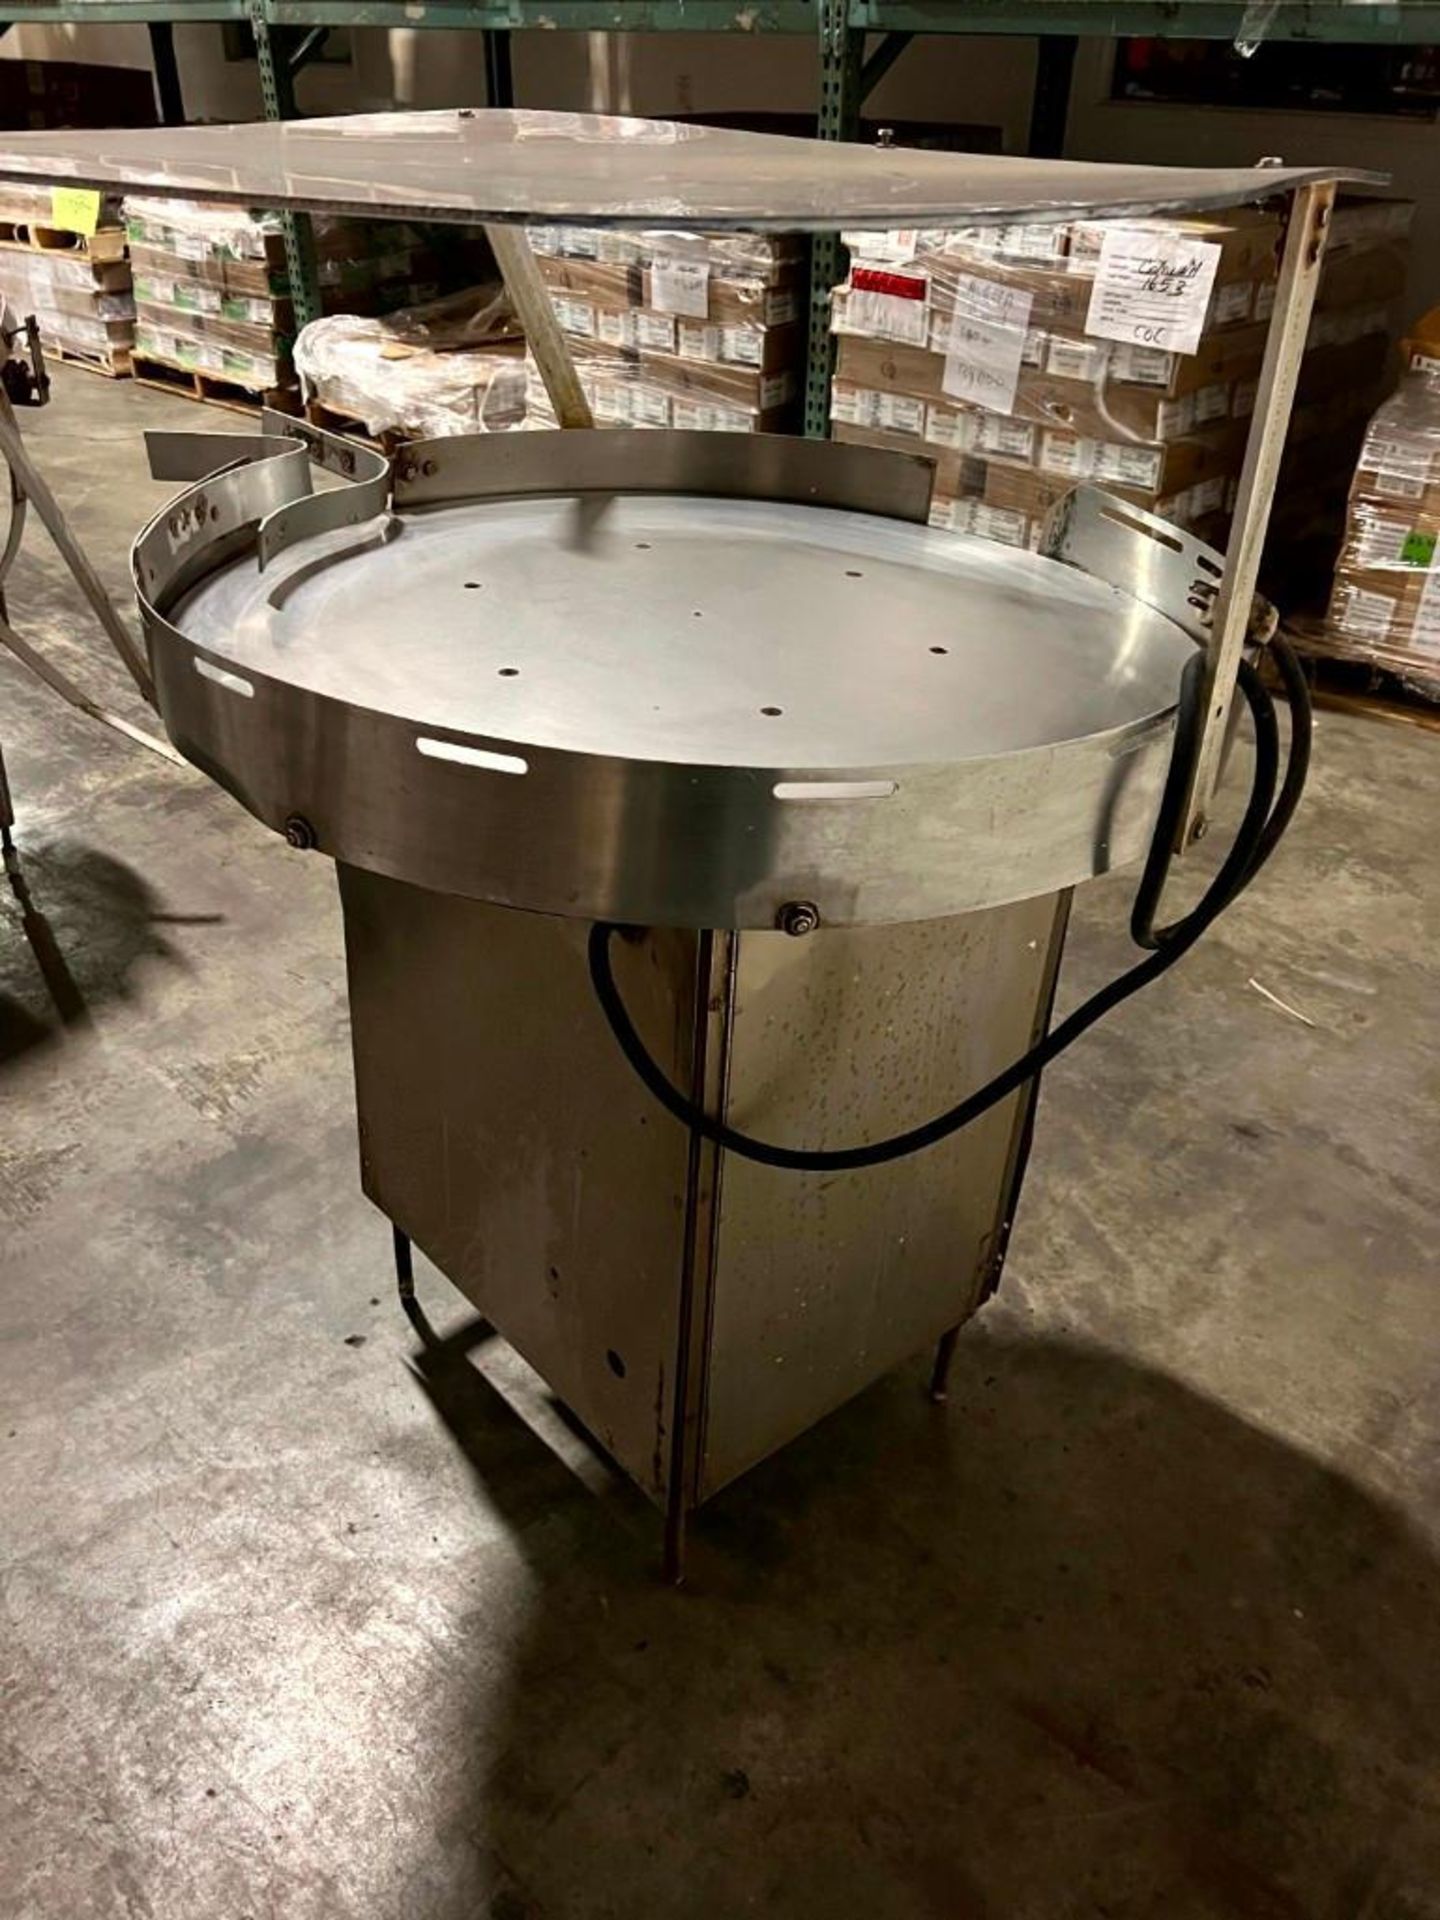 48” DIAMETER PERRY INDUSTRIES ROTARY ACCUMULATION TABLE - Image 2 of 2